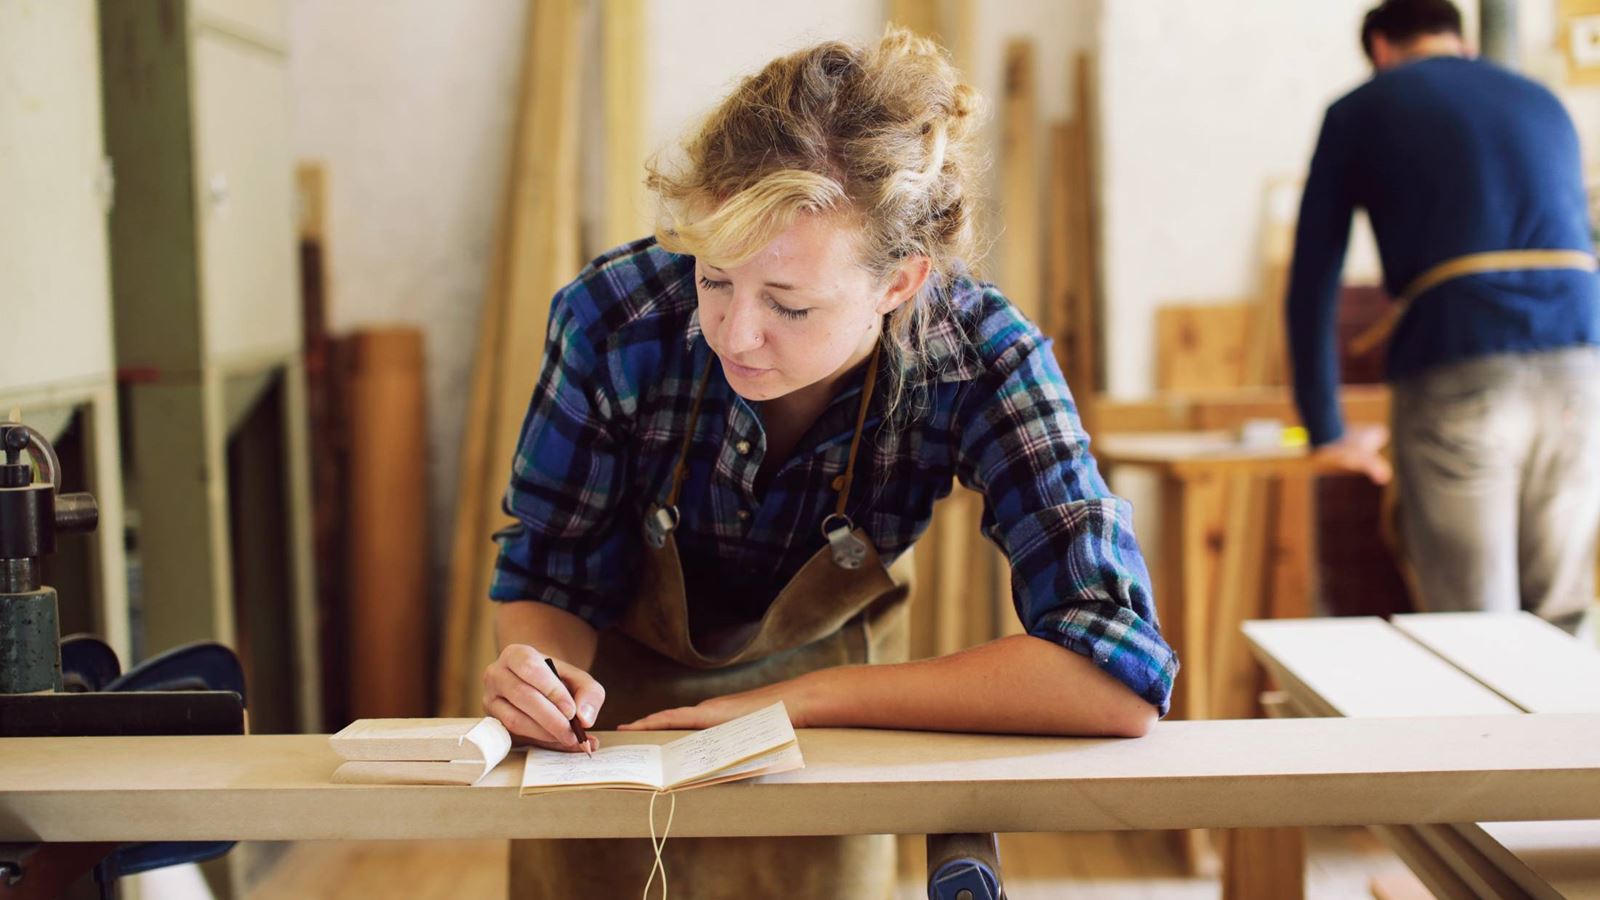 Woodworker making notes in a workshop